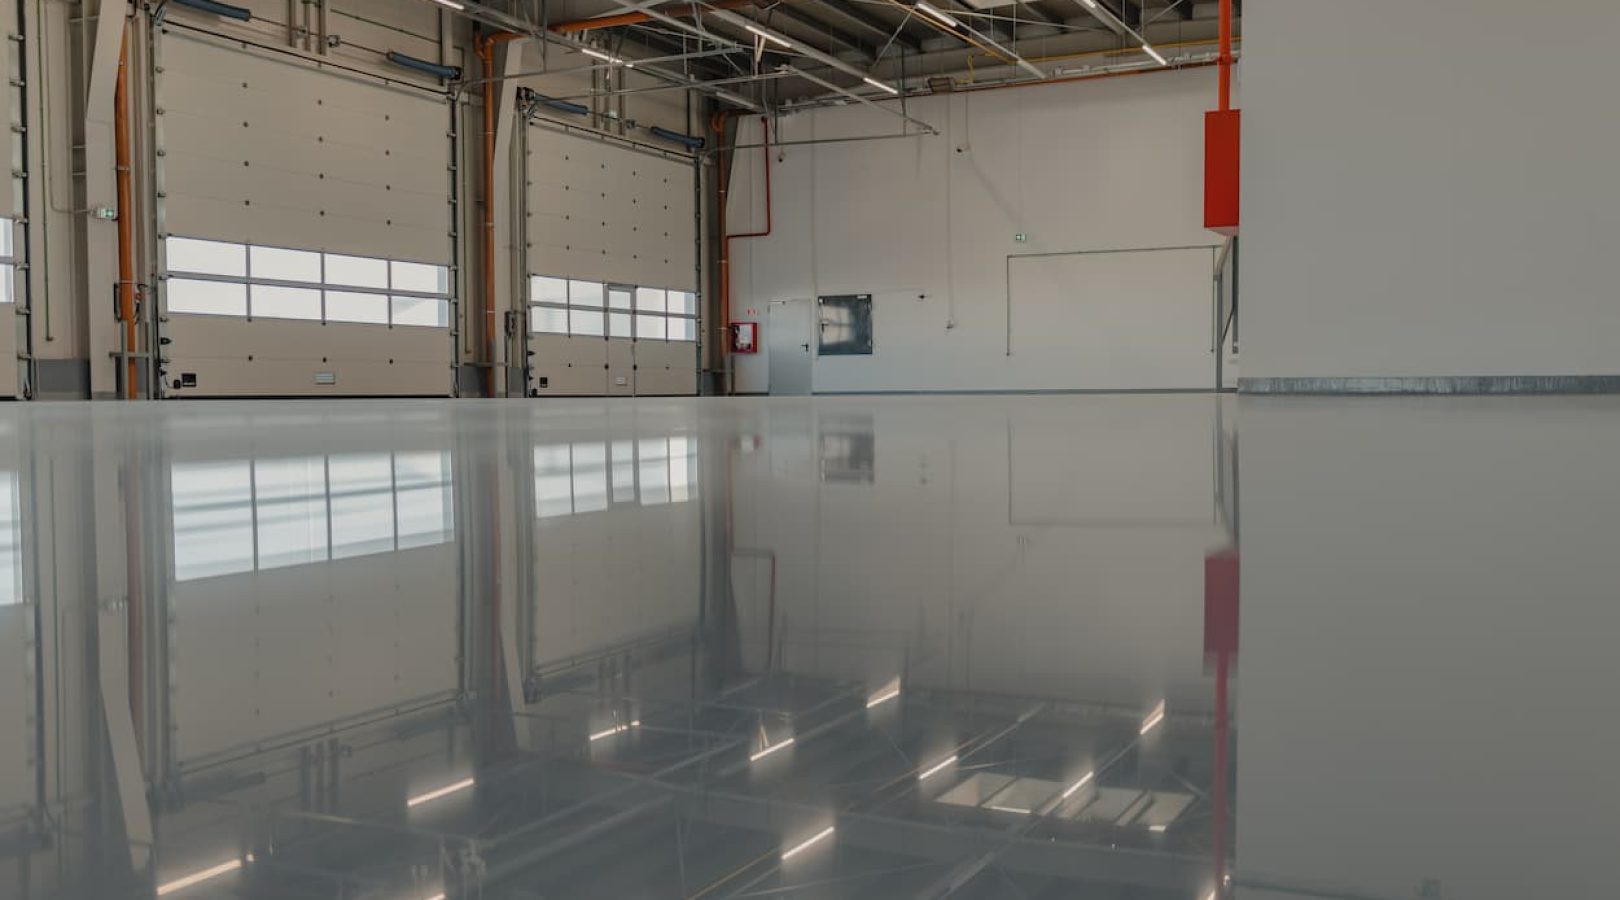 epoxy-and-waxed-flooring-with-colorful-signage-2022-11-05-03-51-56-utc